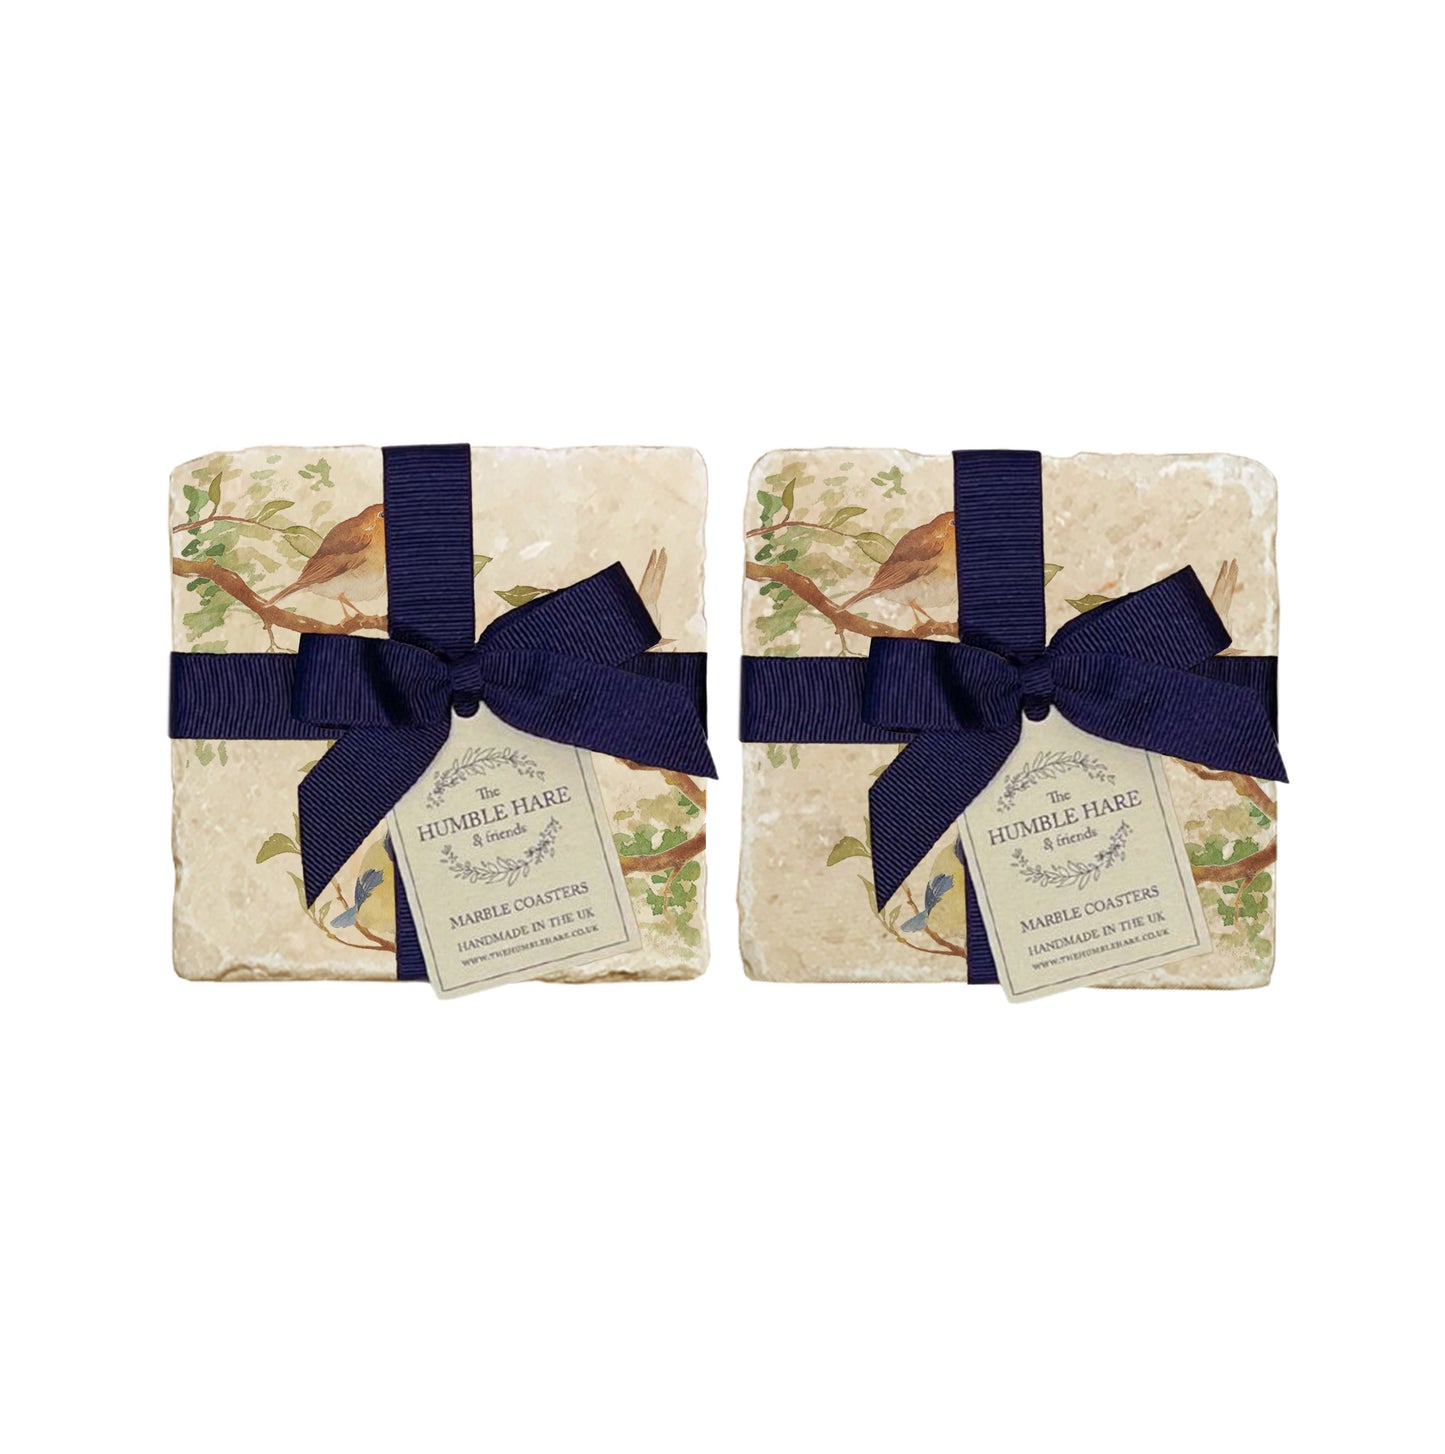 A set of 4 handmade marble coasters packaged in 2 pairs, with a luxurious dark blue bow and gift tag.